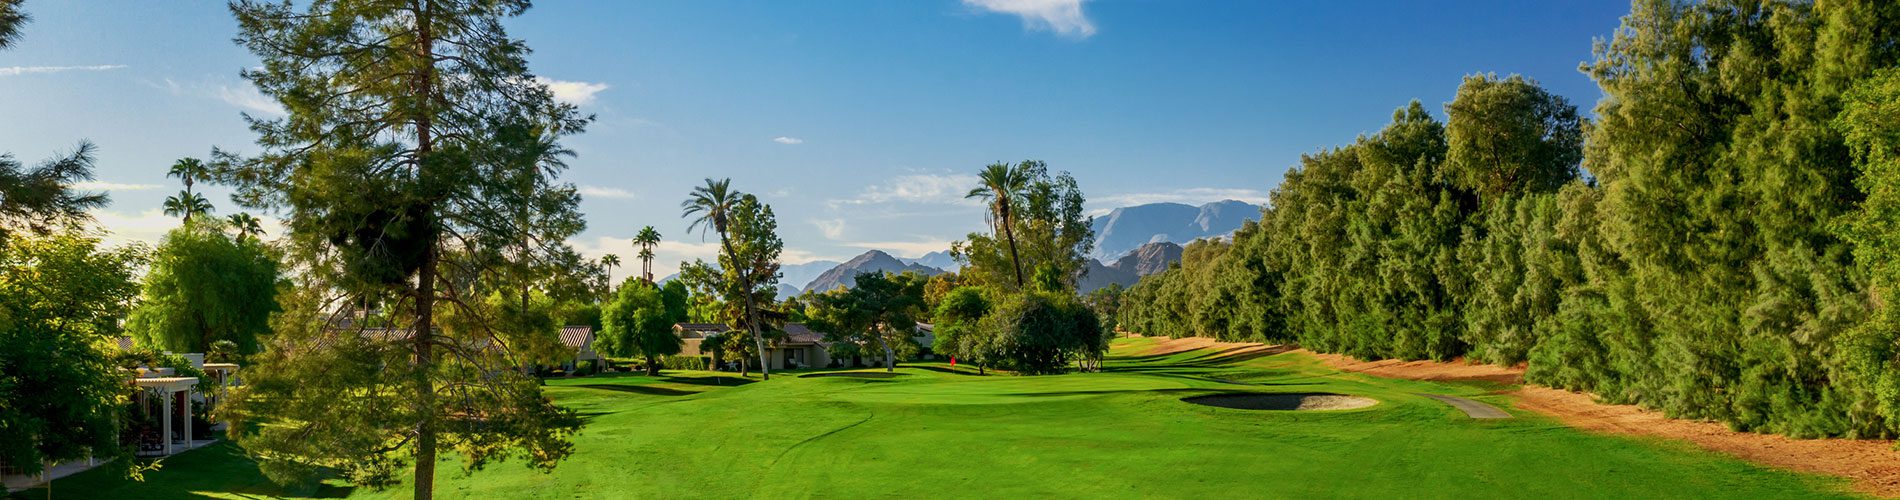 A golf course with trees and mountains in the background.